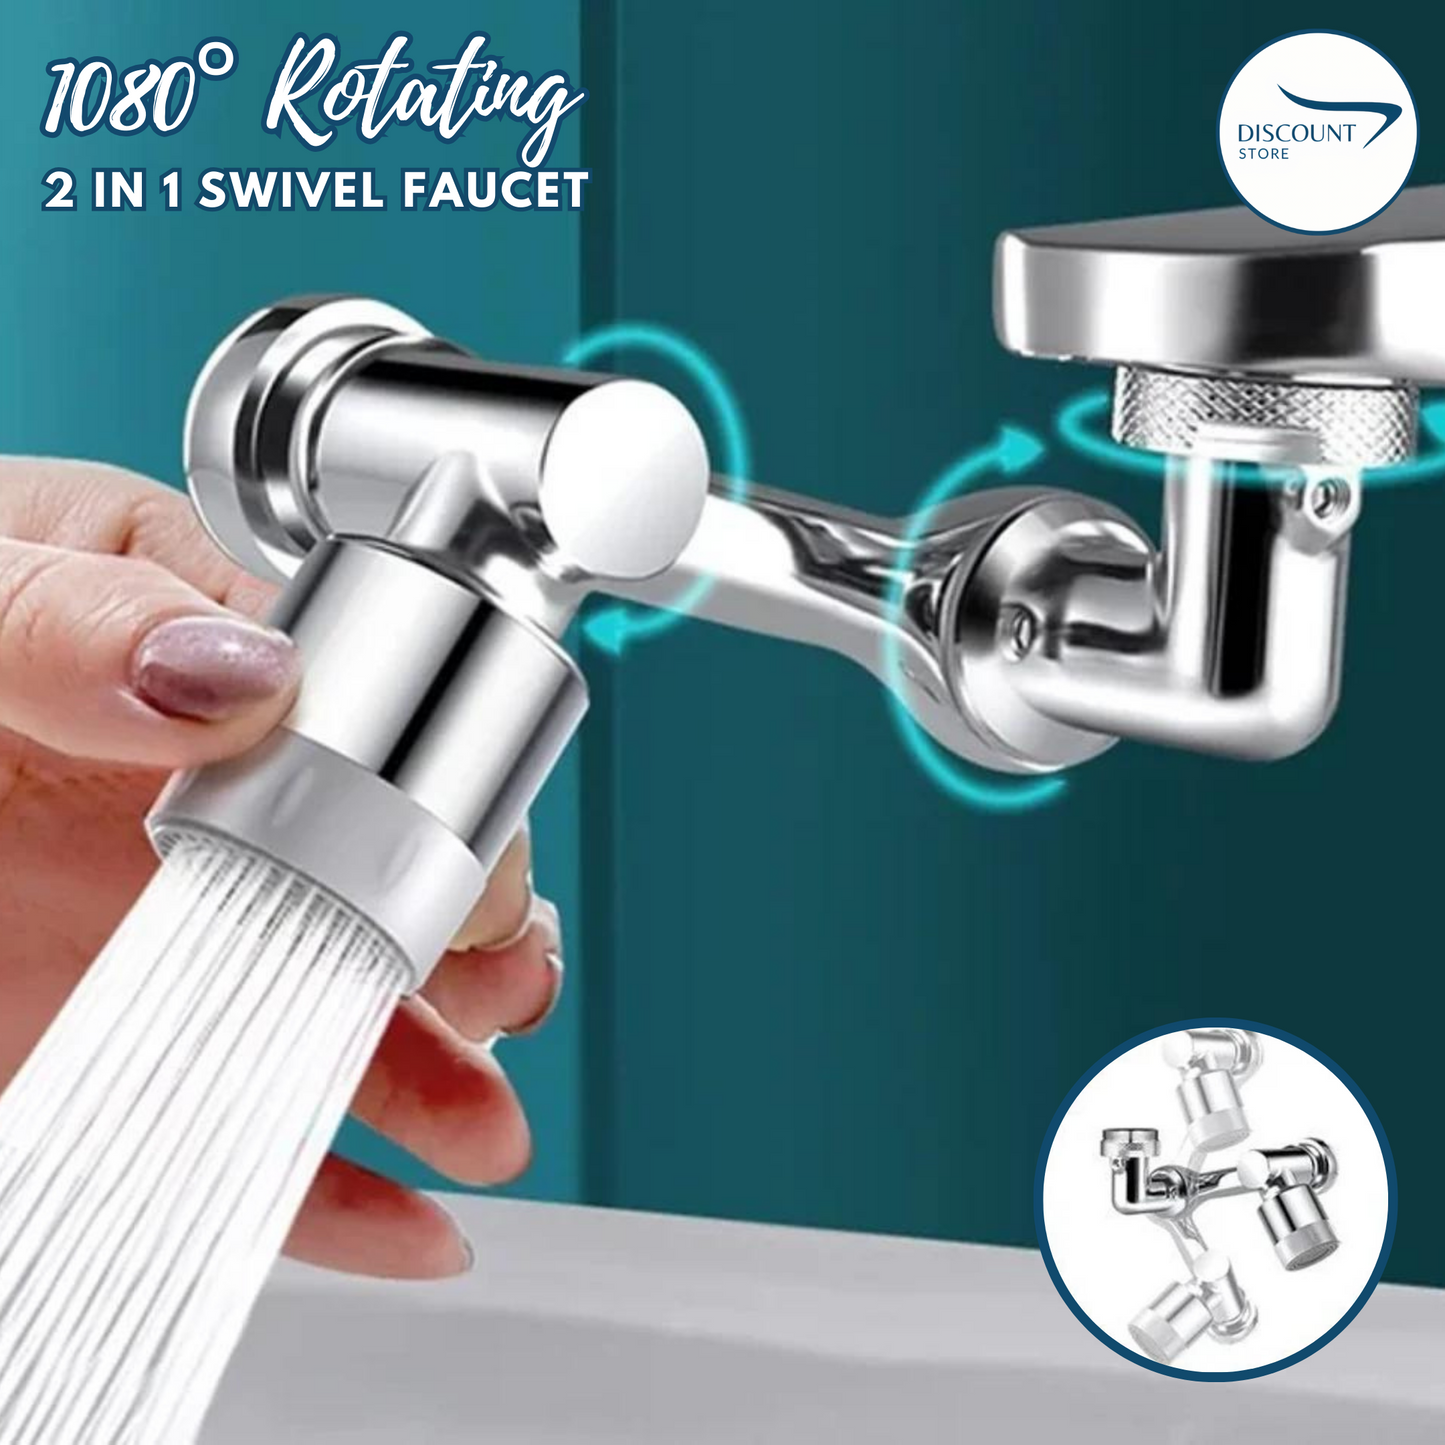 1080 Degree Rotating Swivel Faucet - (FREE Delivery)